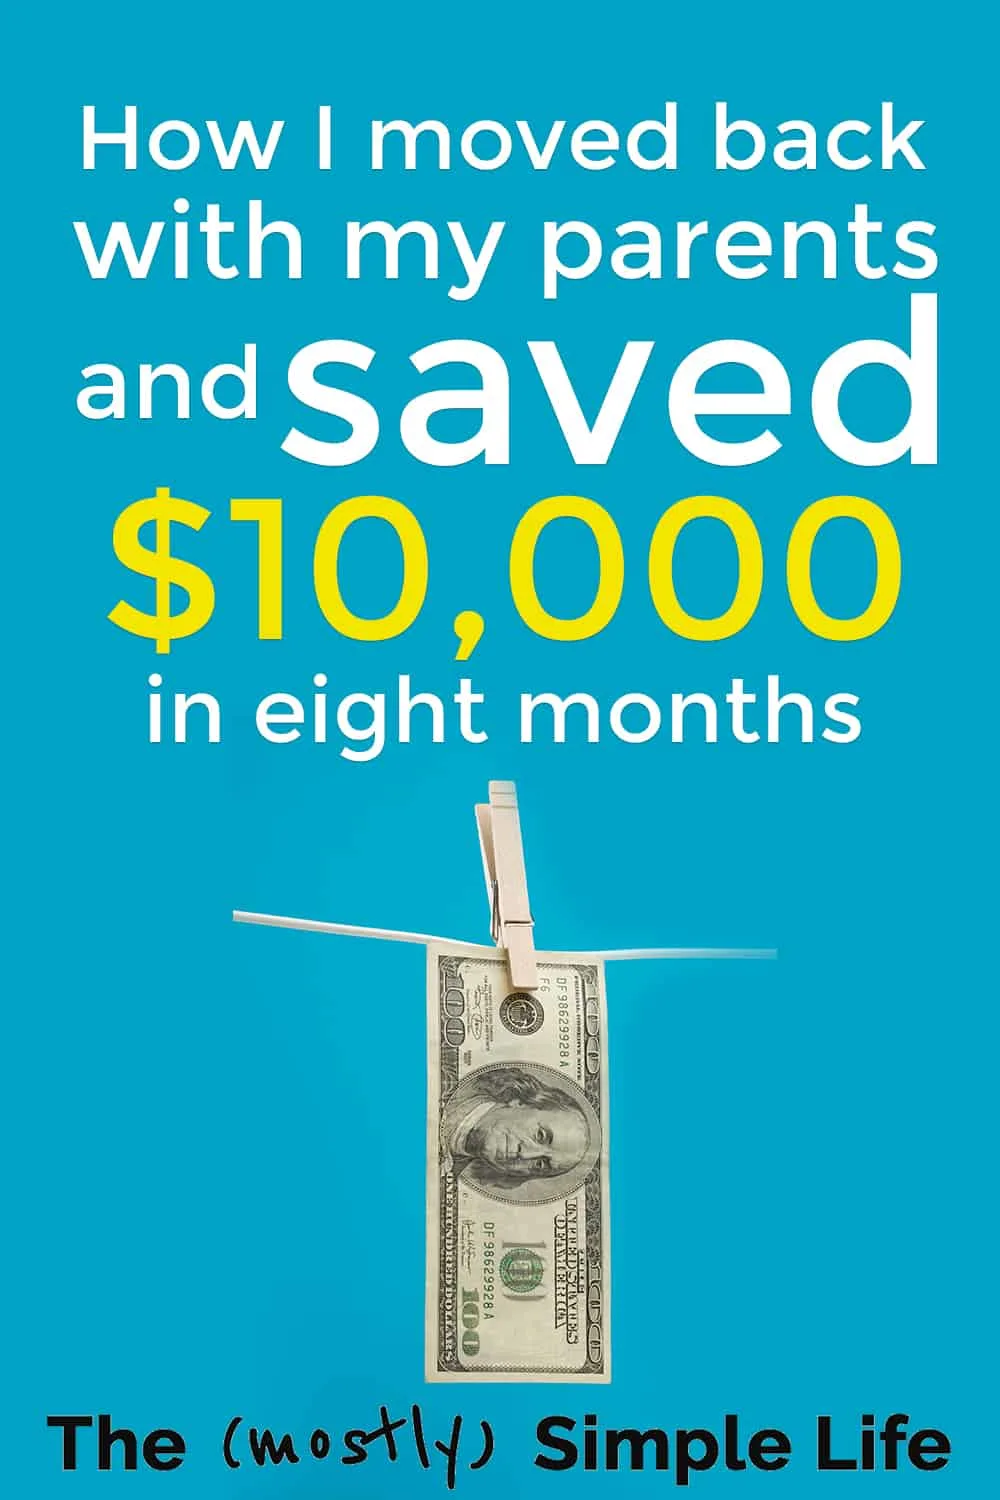 How I Moved Back with my Parents and Saved $10,000 in Nine Months